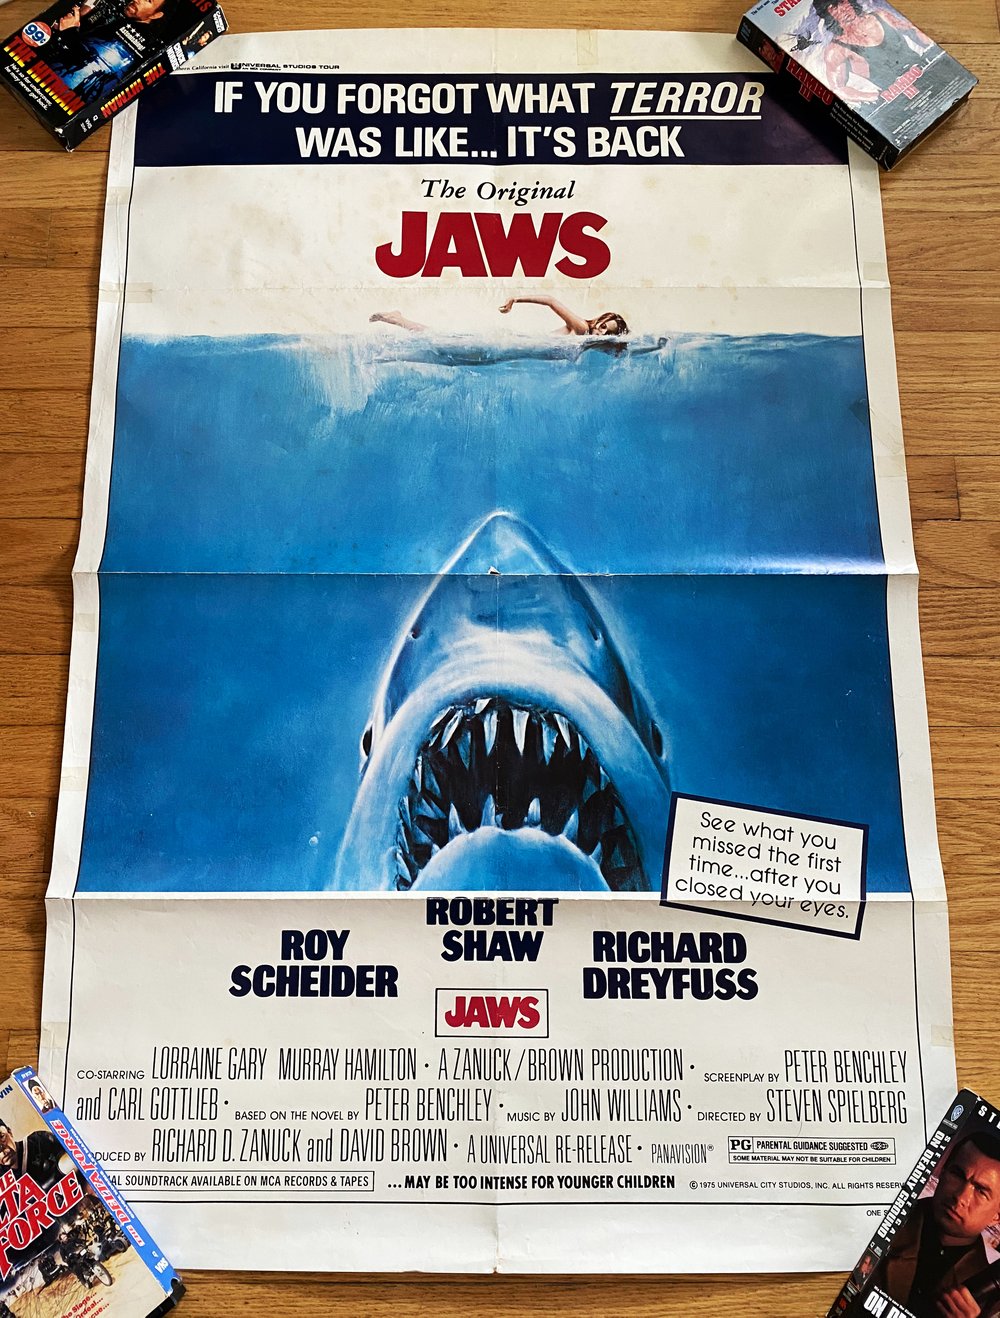 1975 JAWS Original 1979 RE RELEASE One Sheet Movie Poster